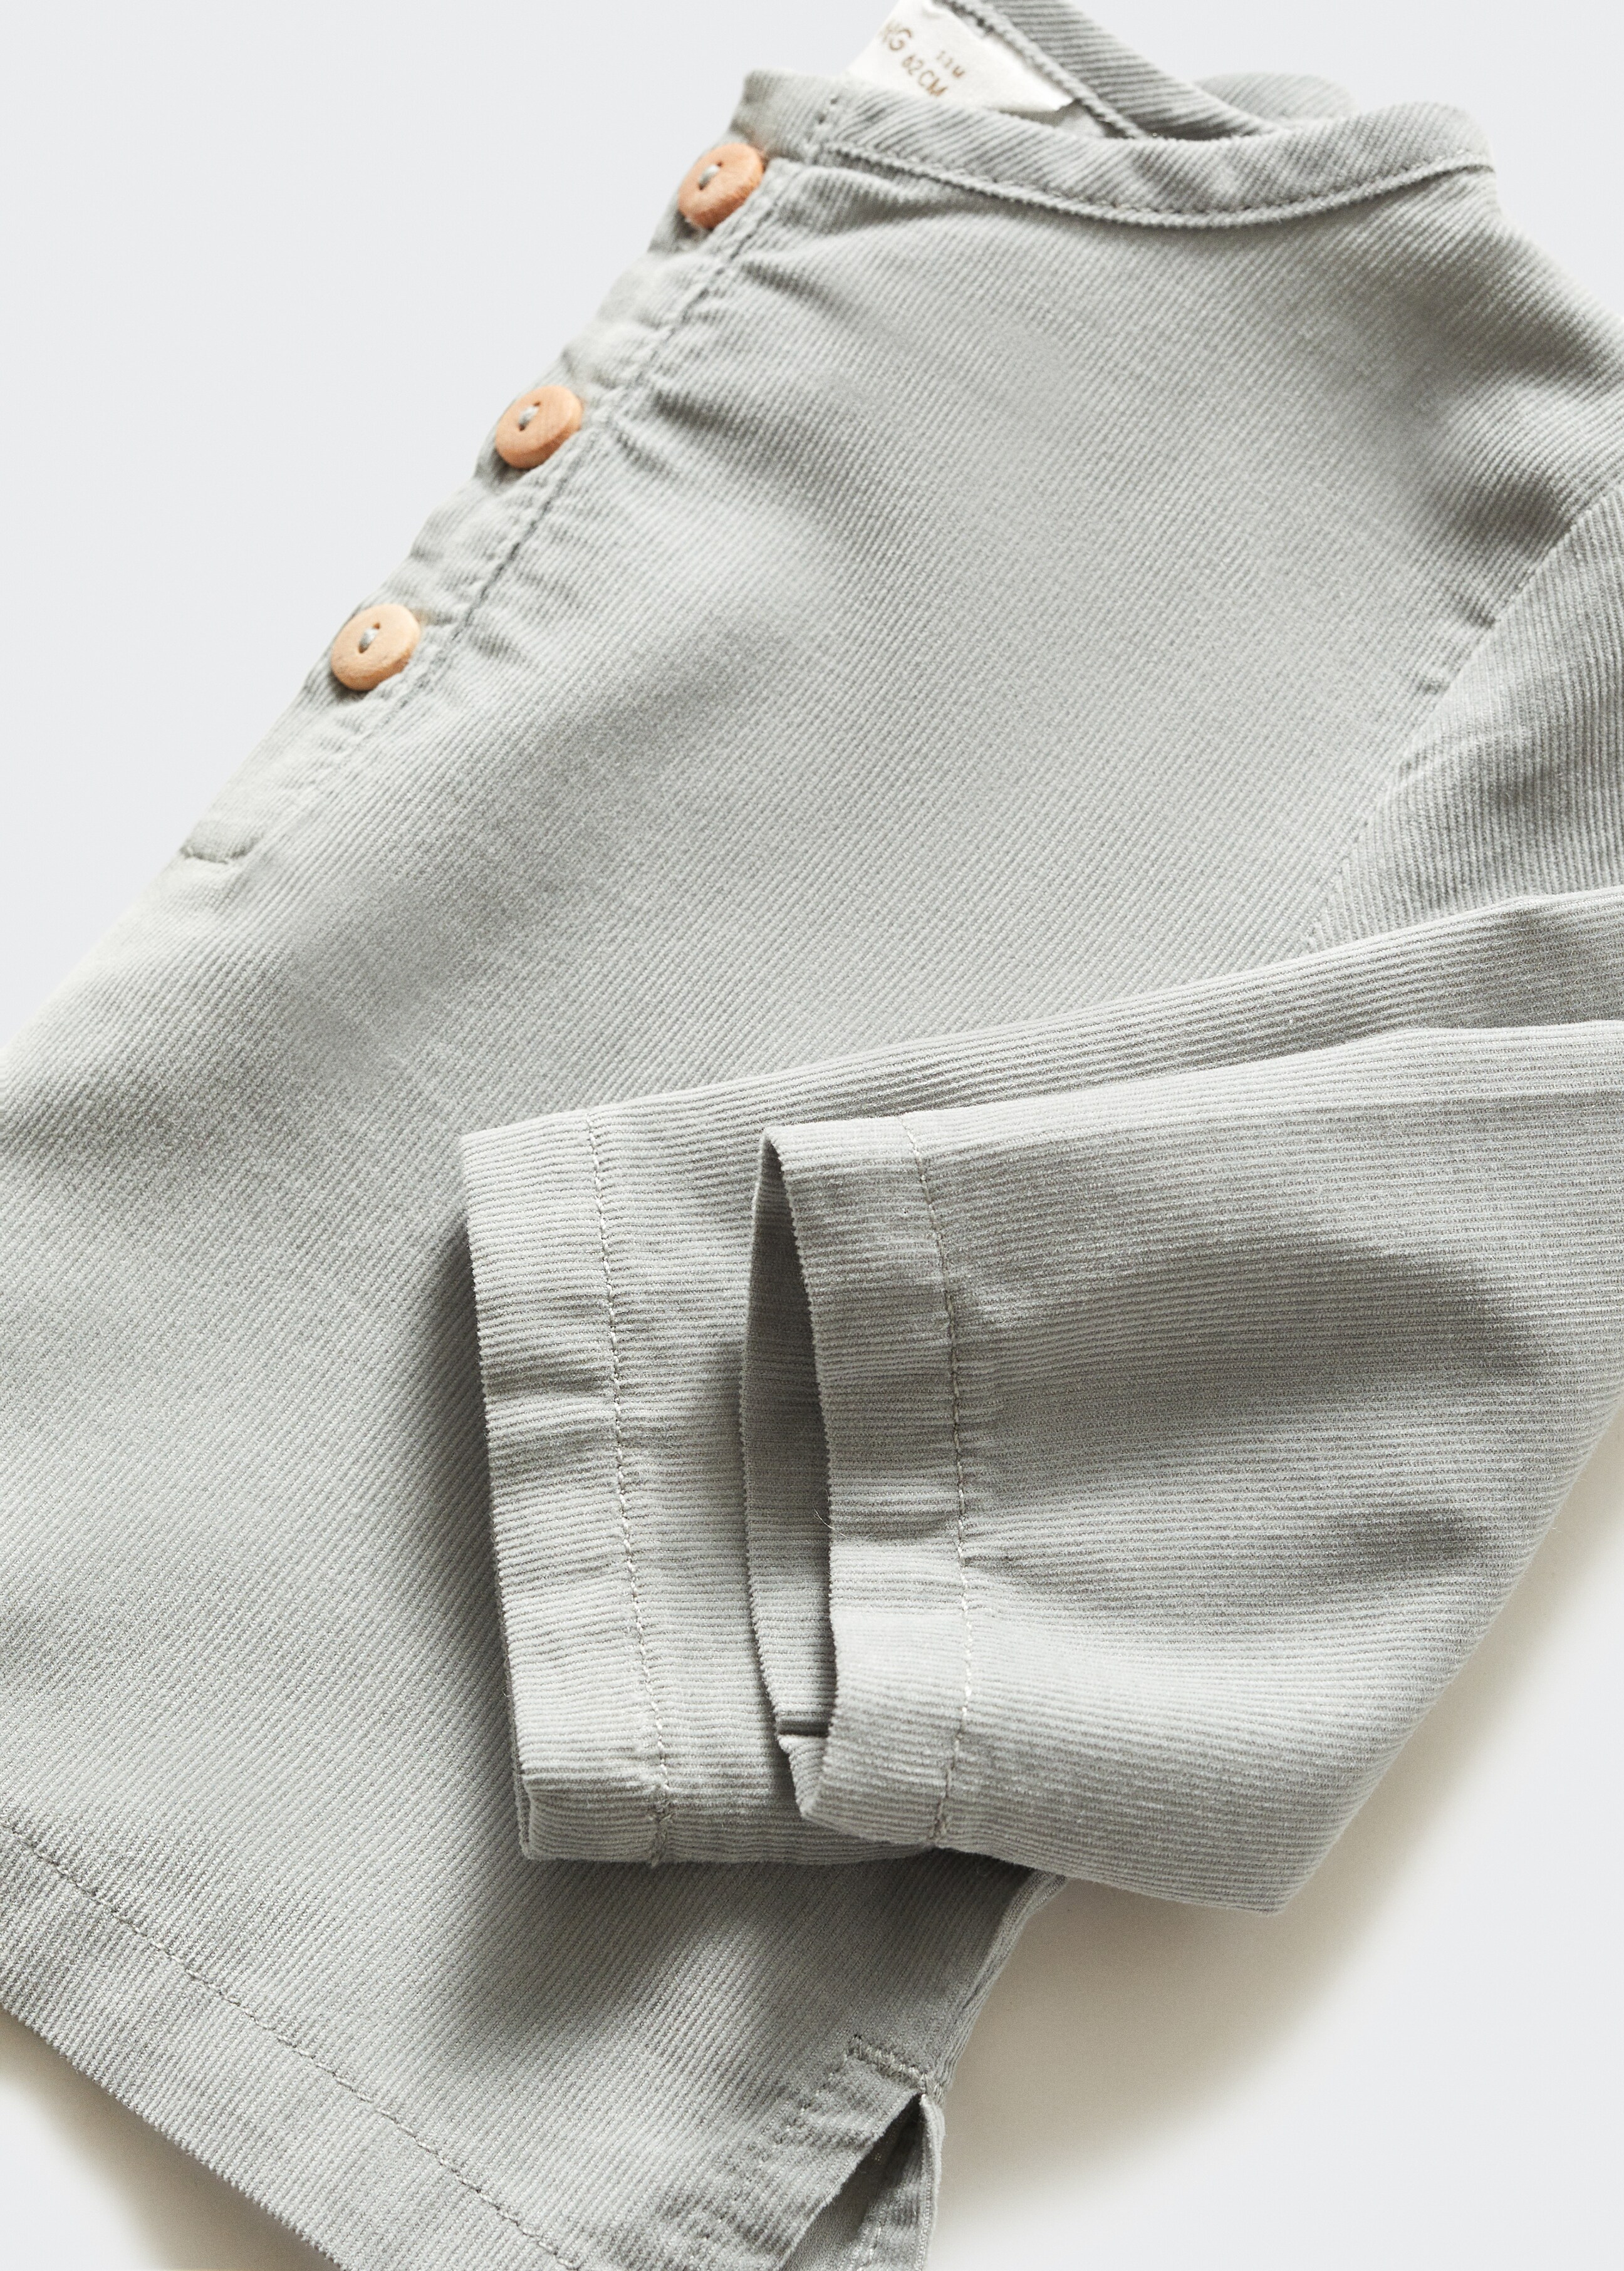 Buttoned cotton shirt - Details of the article 8